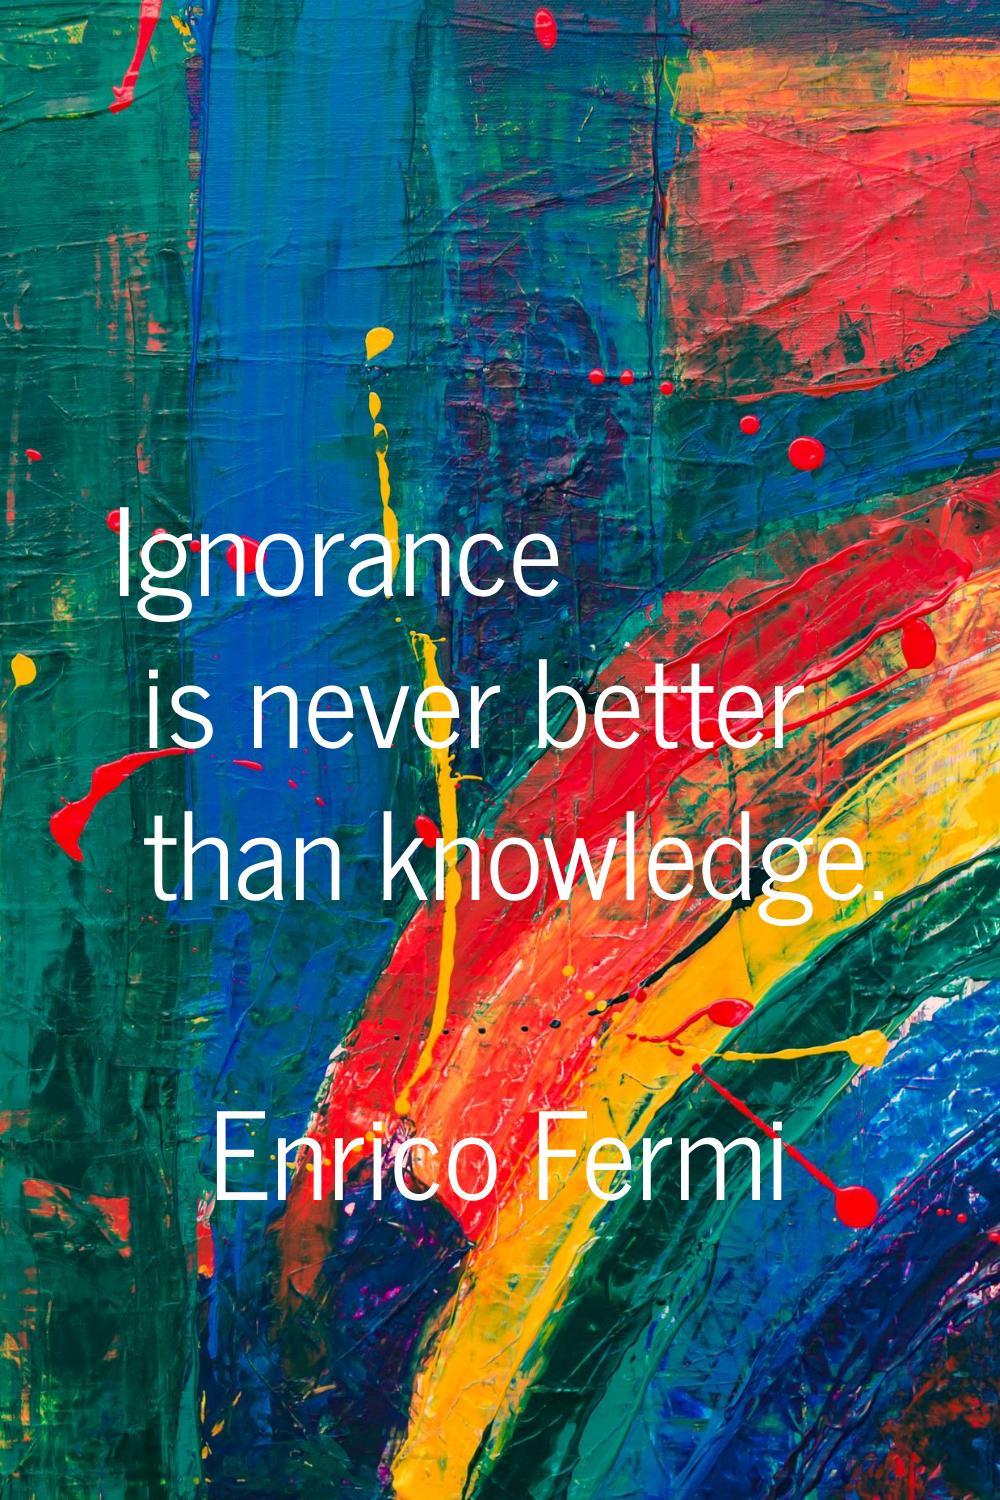 Ignorance is never better than knowledge.